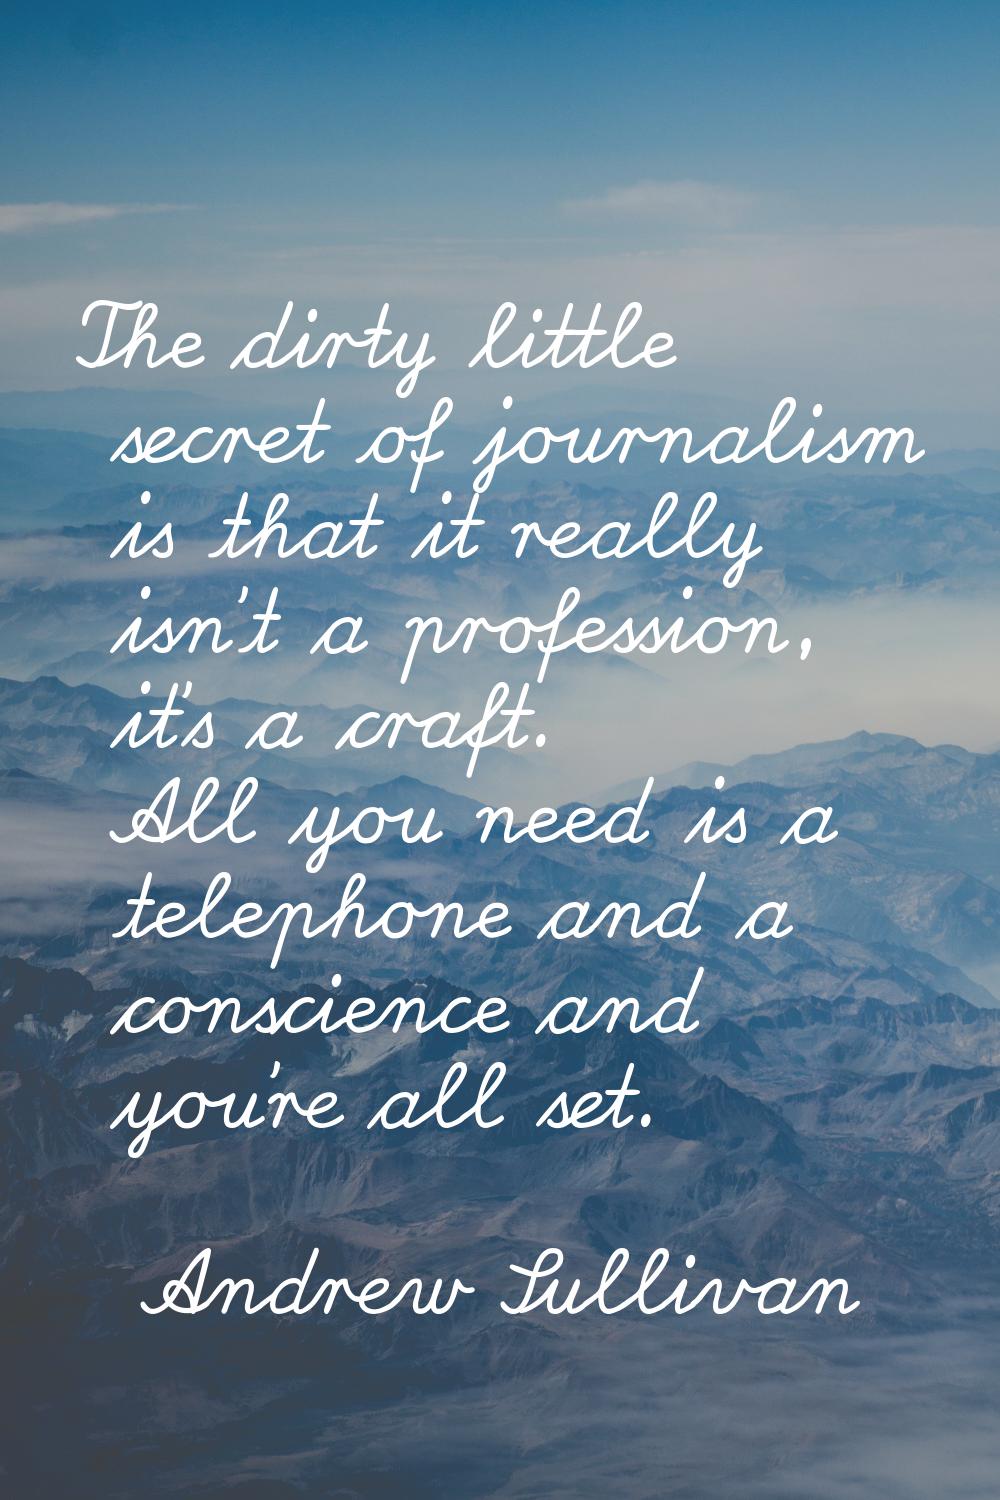 The dirty little secret of journalism is that it really isn't a profession, it's a craft. All you n